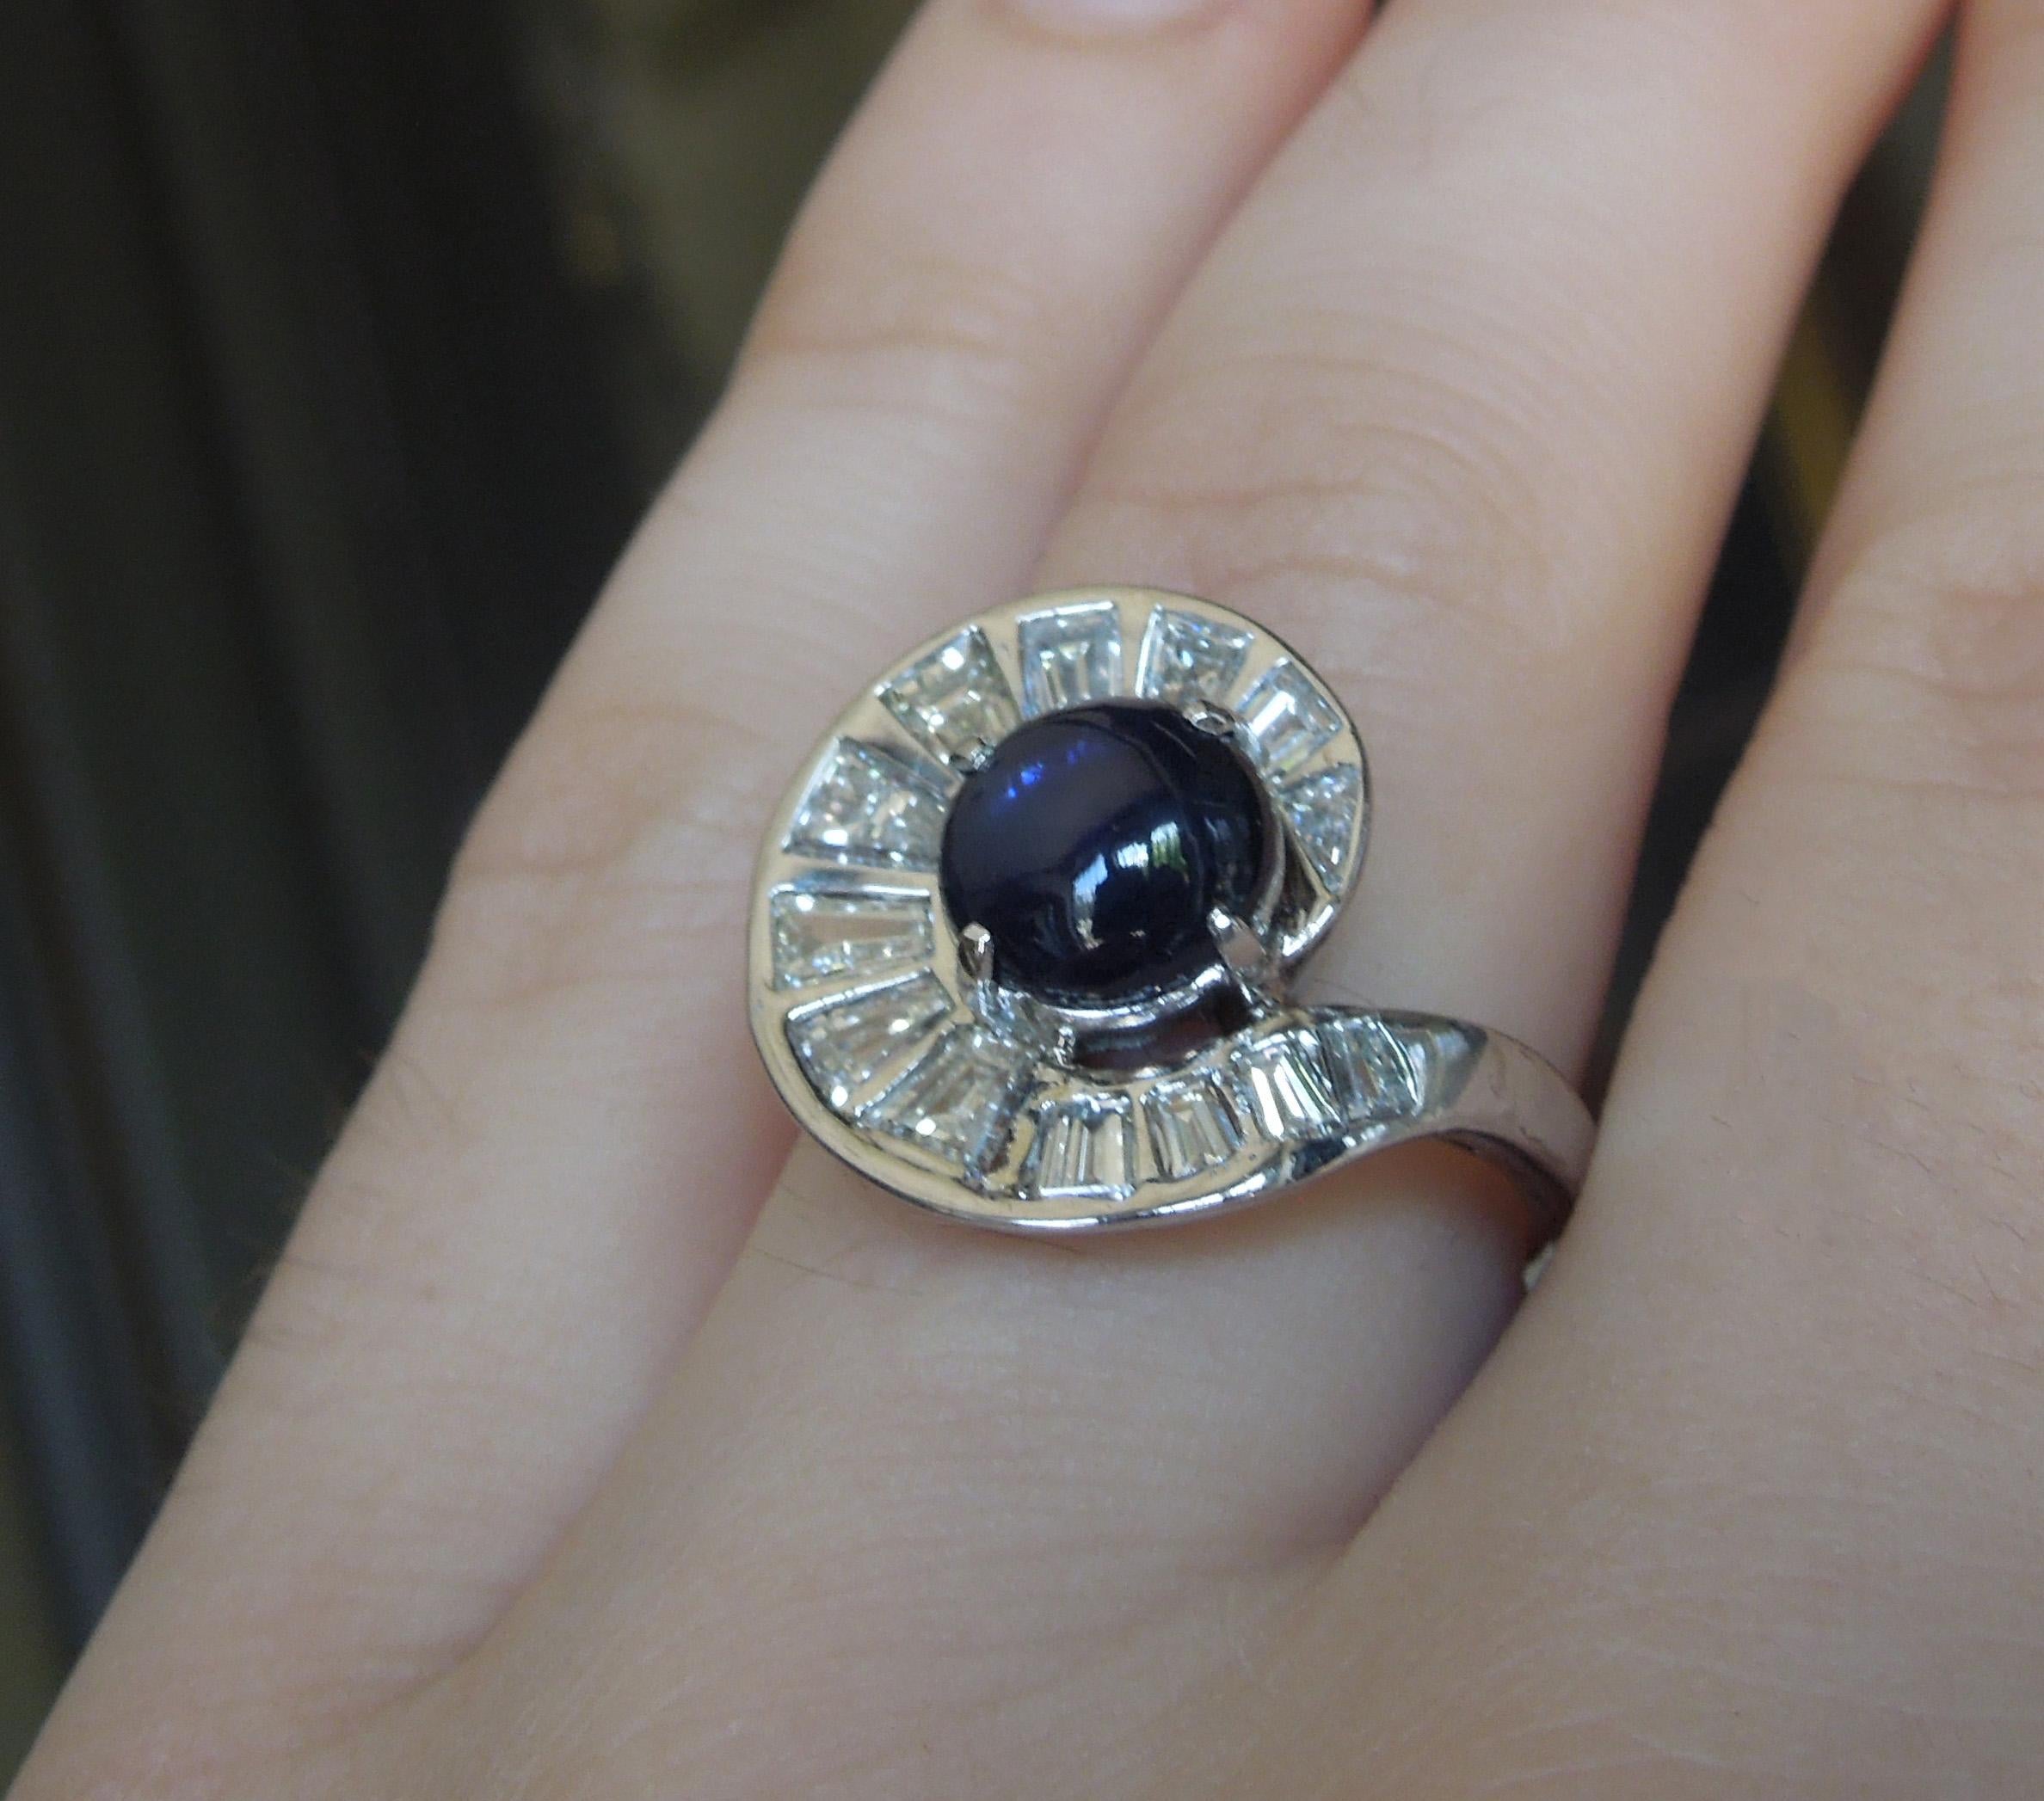 In a Mid-Century timeless design, this Star Sapphire & Baguette Piano Key Platinum Cocktail Ring features a central 2.57 carat Iridescent Rich Blue Sapphire spiraled by 1.35 carats of unusually large Tapered Baguette cut Nearly Colorless Nearly